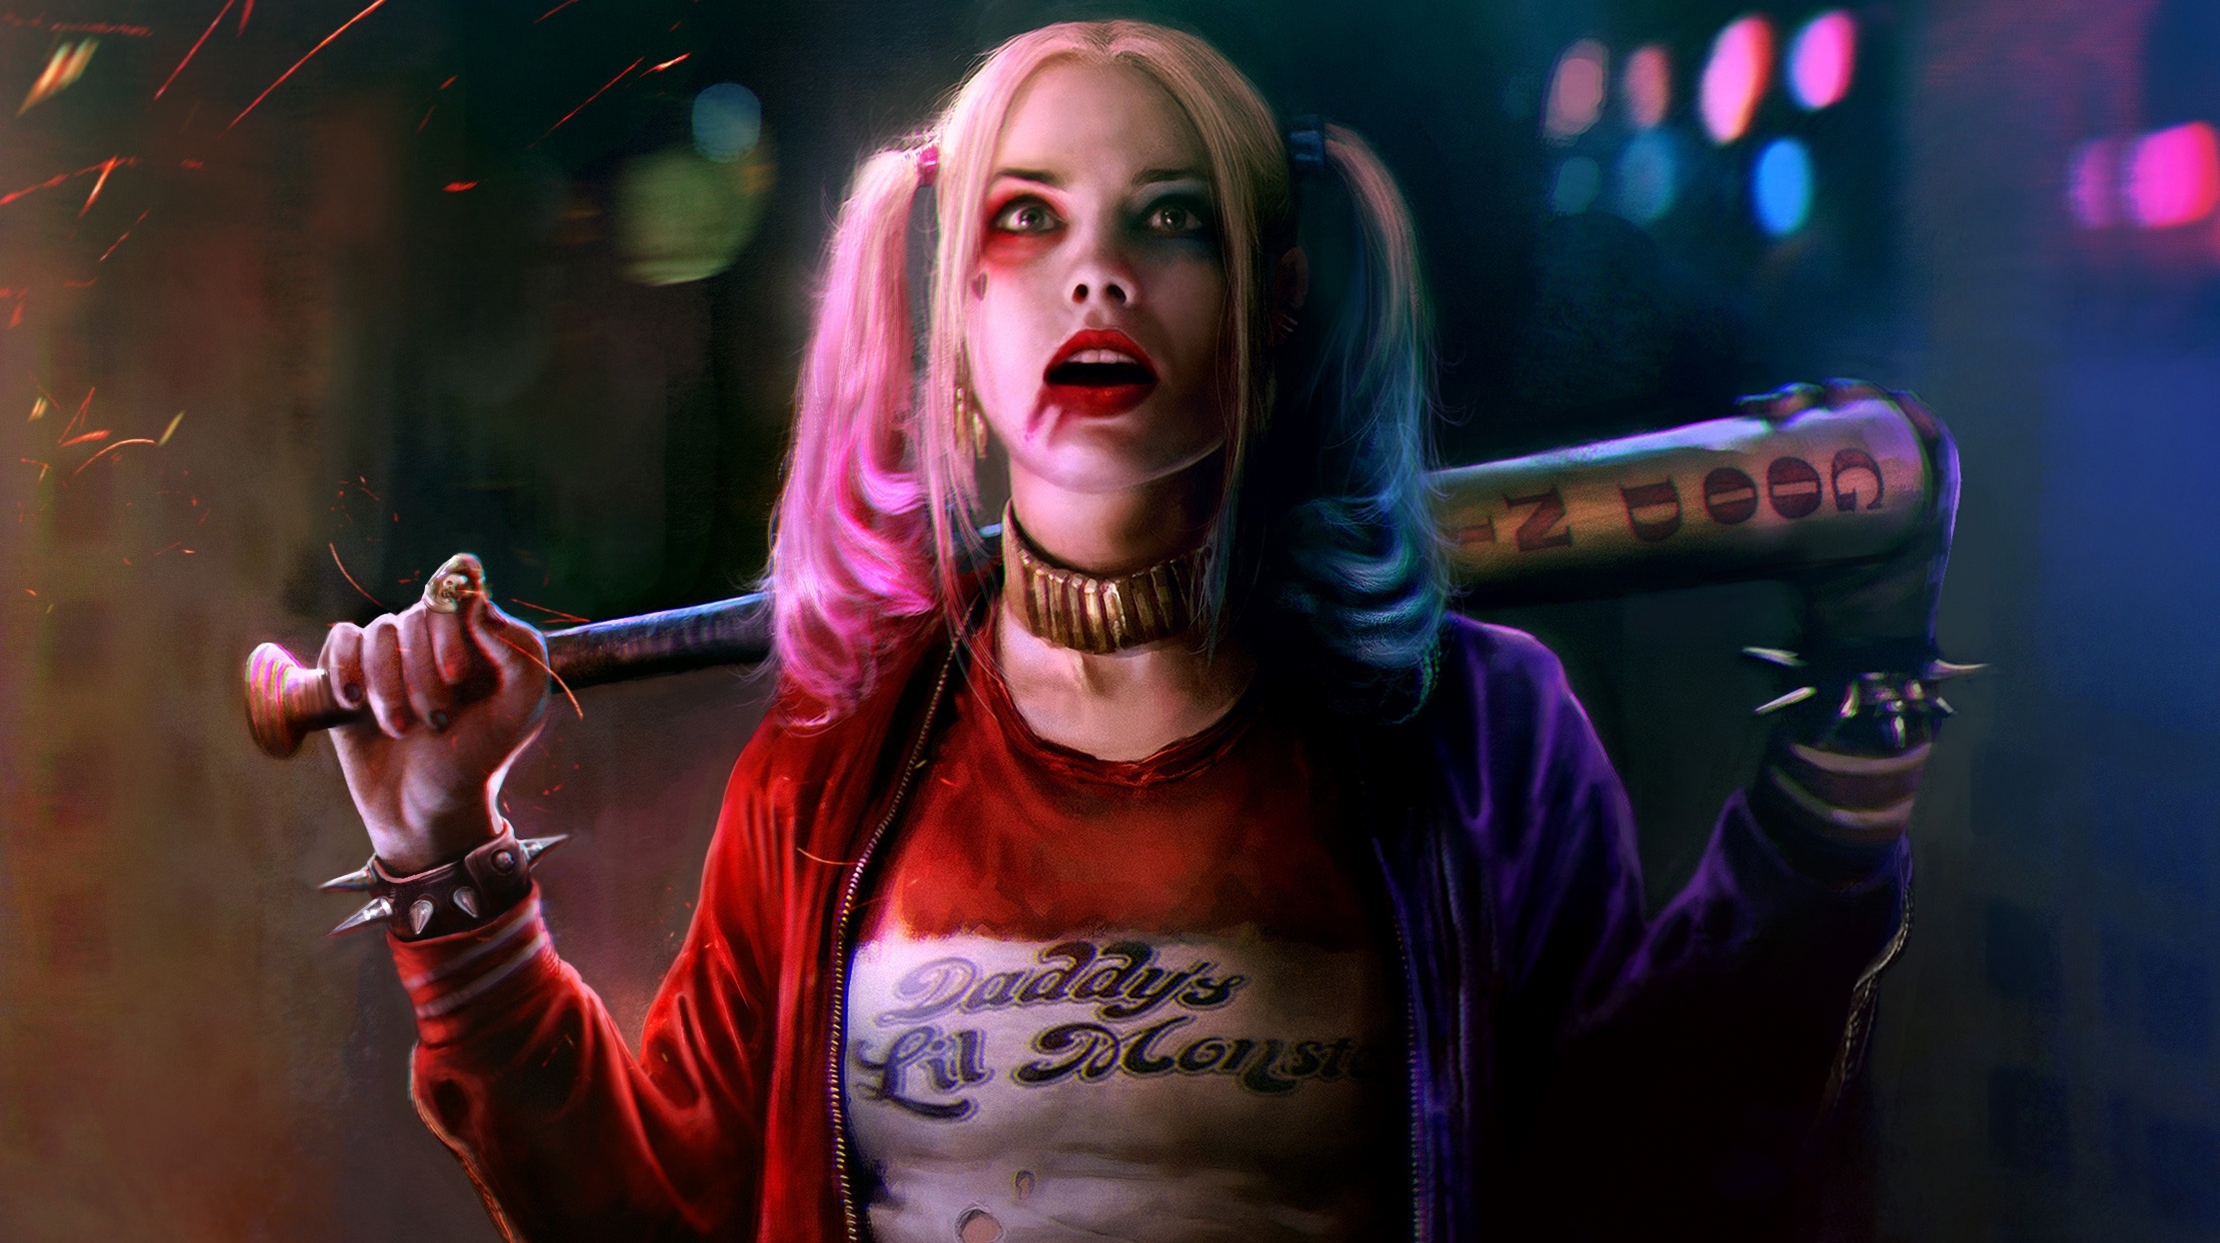 blonde, harley quinn, movie, collar, suicide squad, margot robbie, baseball bat, dc comics, spikes, two toned hair wallpaper for mobile